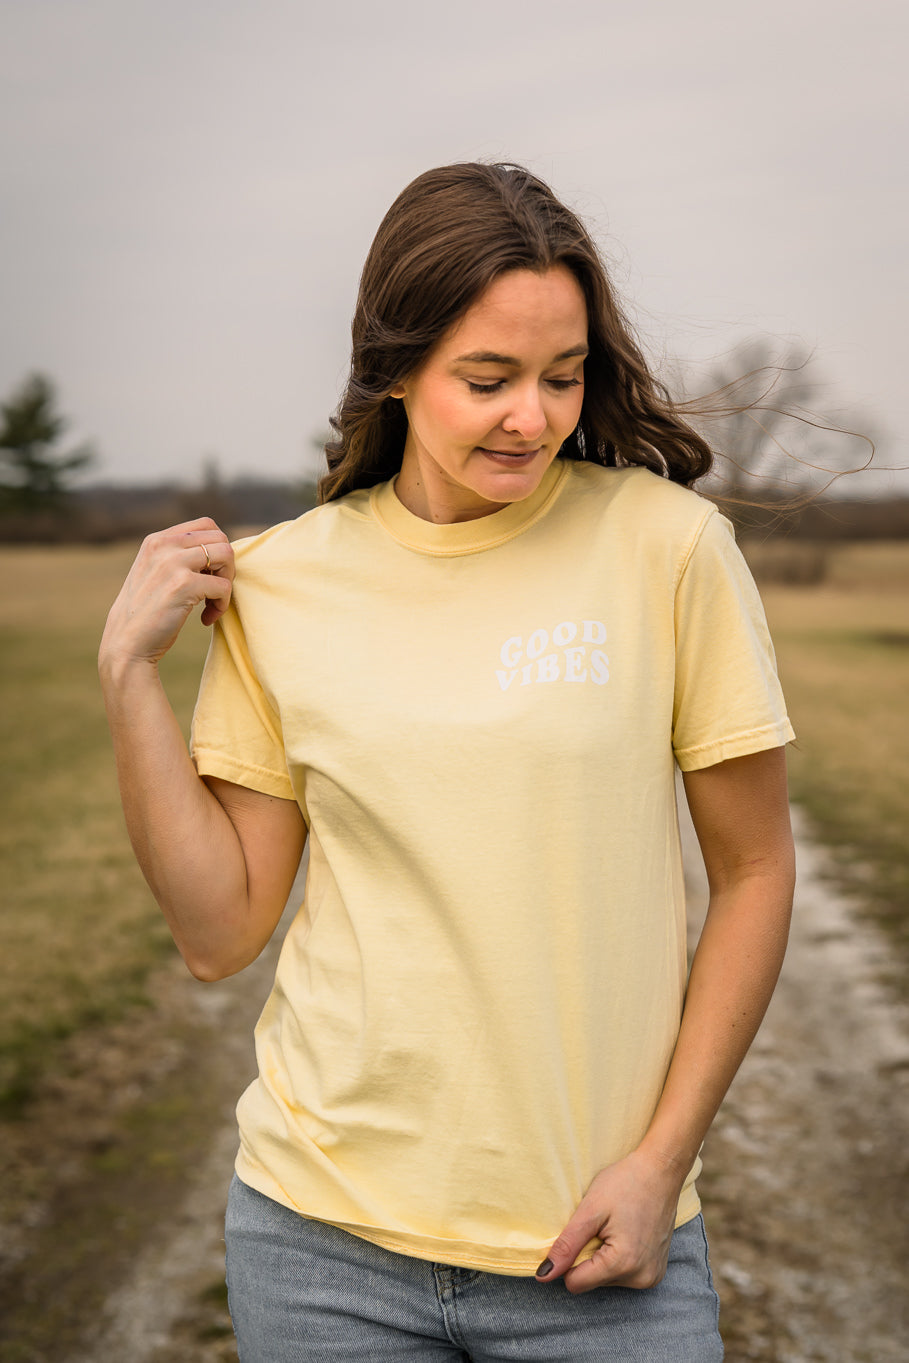 Good Vibes and Tractor Rides (More Colors) | Sizes S - 3XL